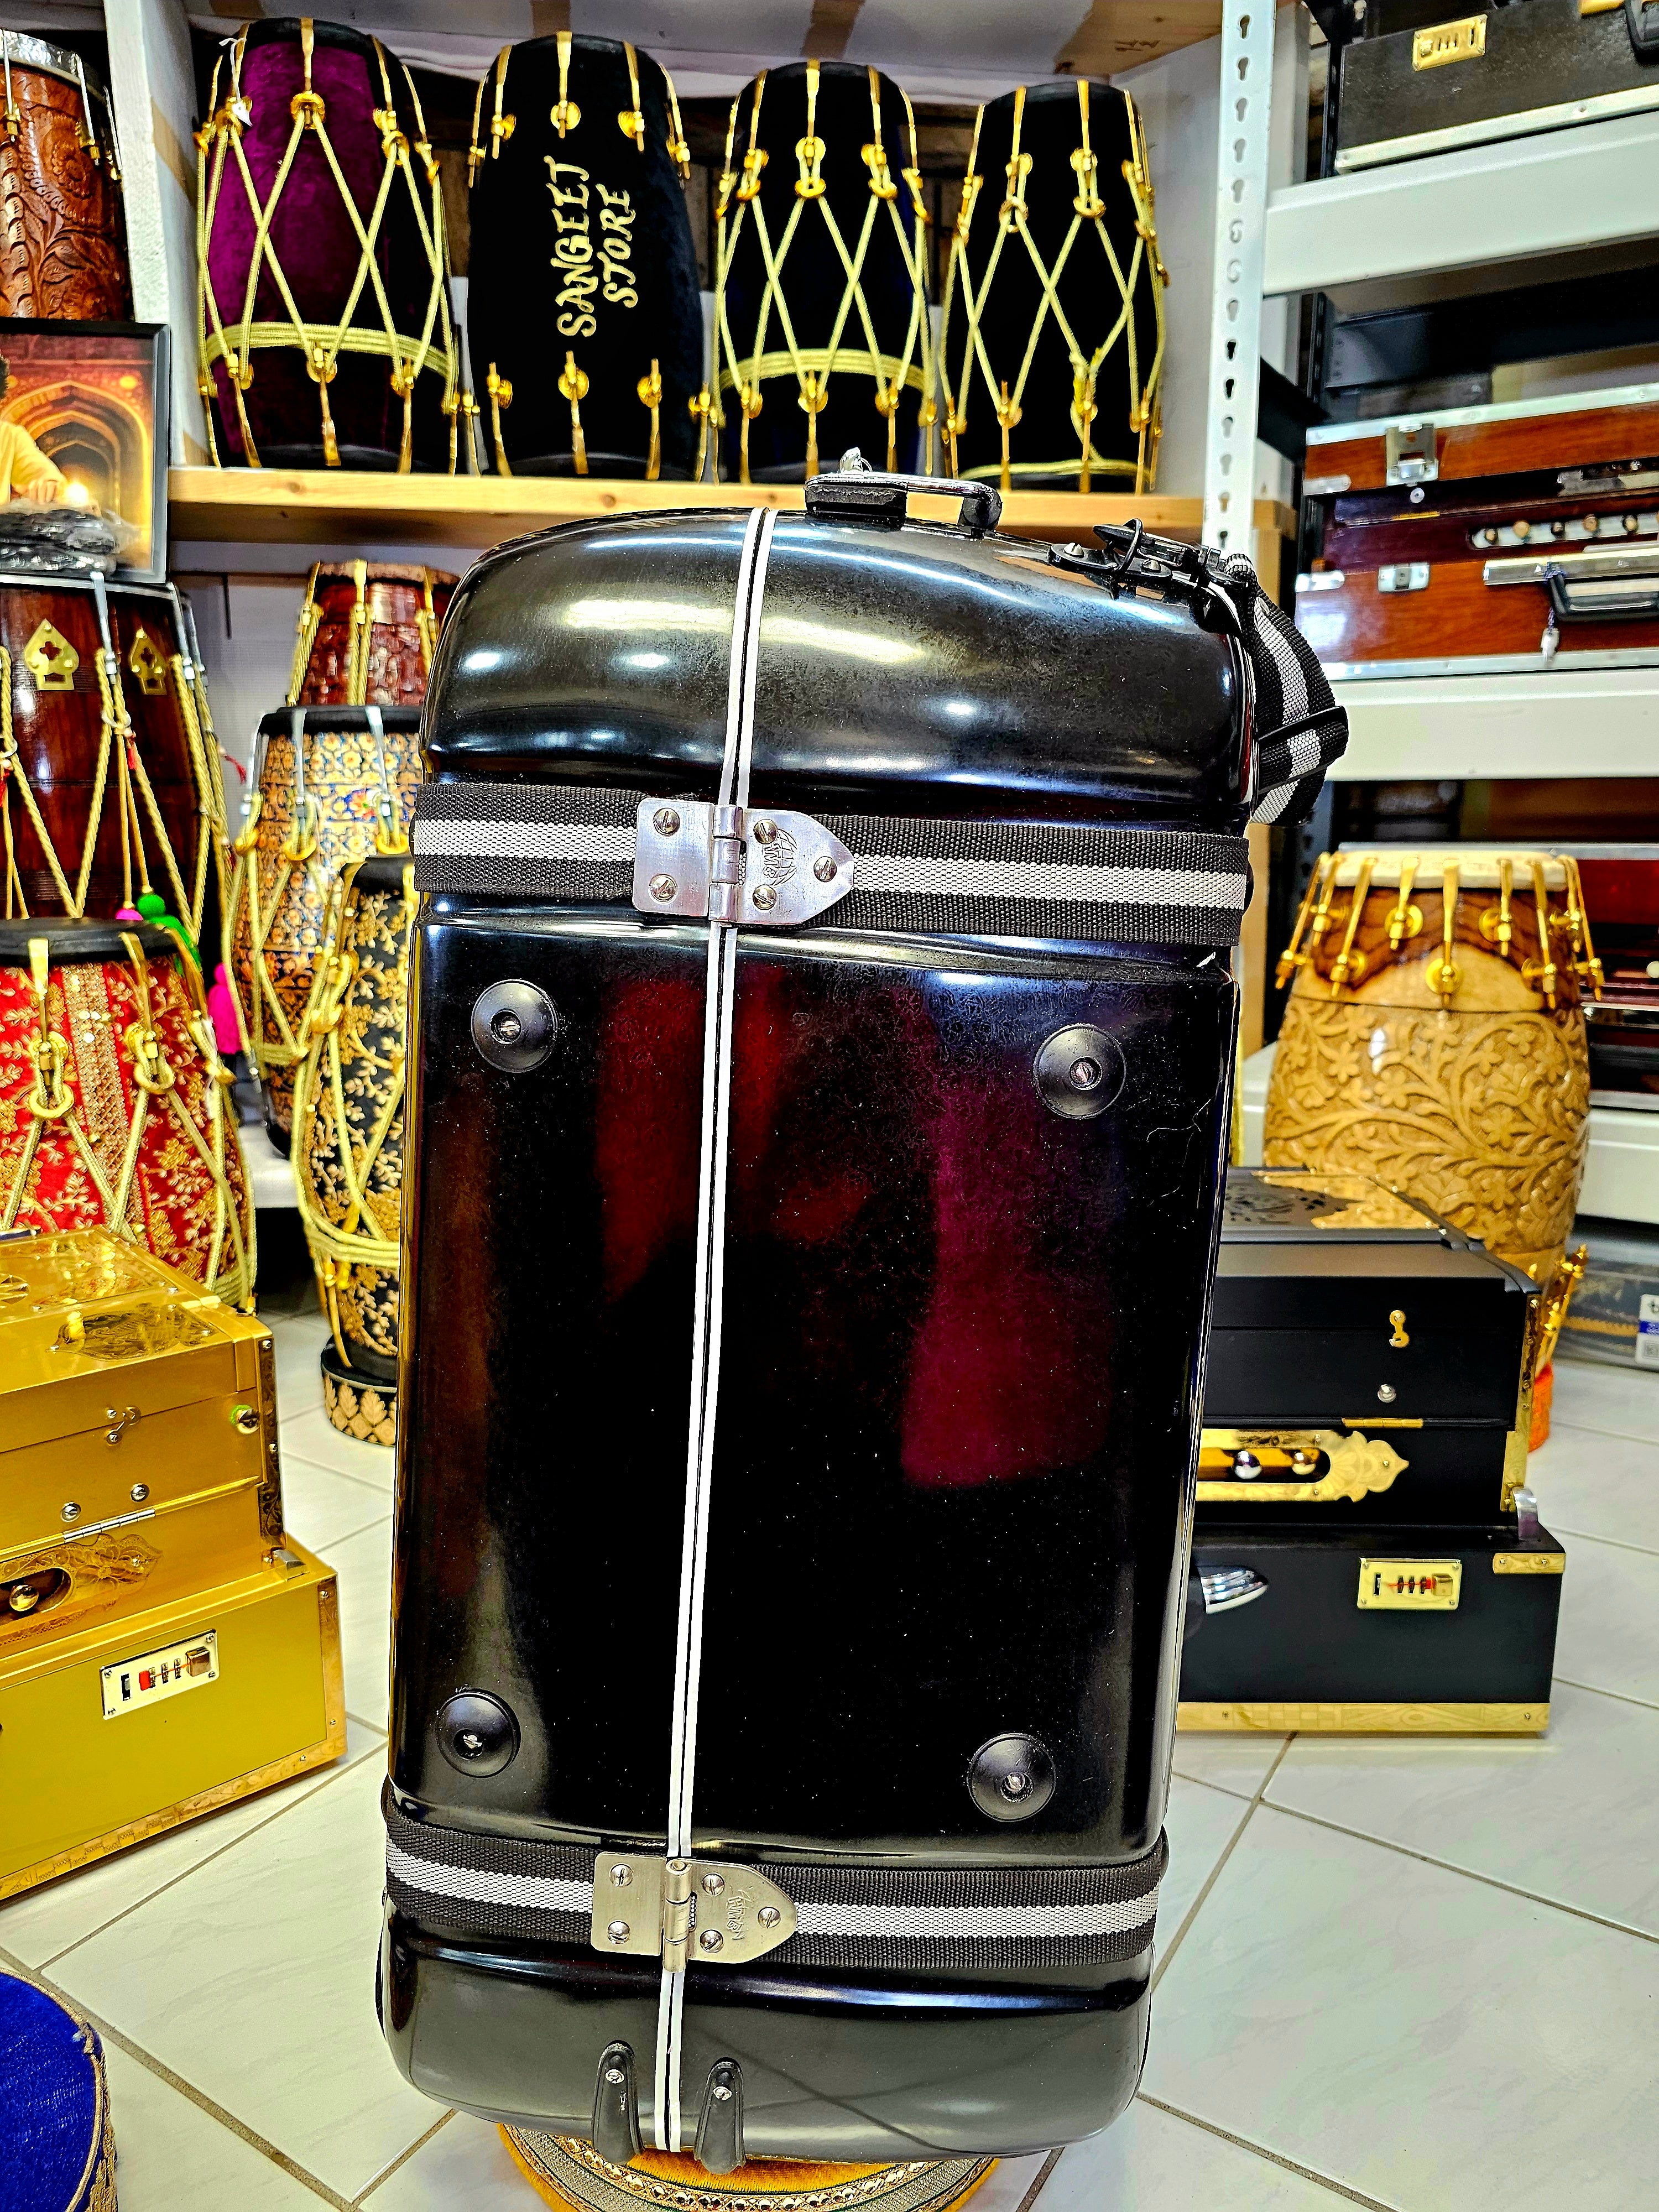 Melodic Fortress: Sleek Black 2-Piece Tabla/Dholak Case with Enhanced Mobility and Red Felt Luxury